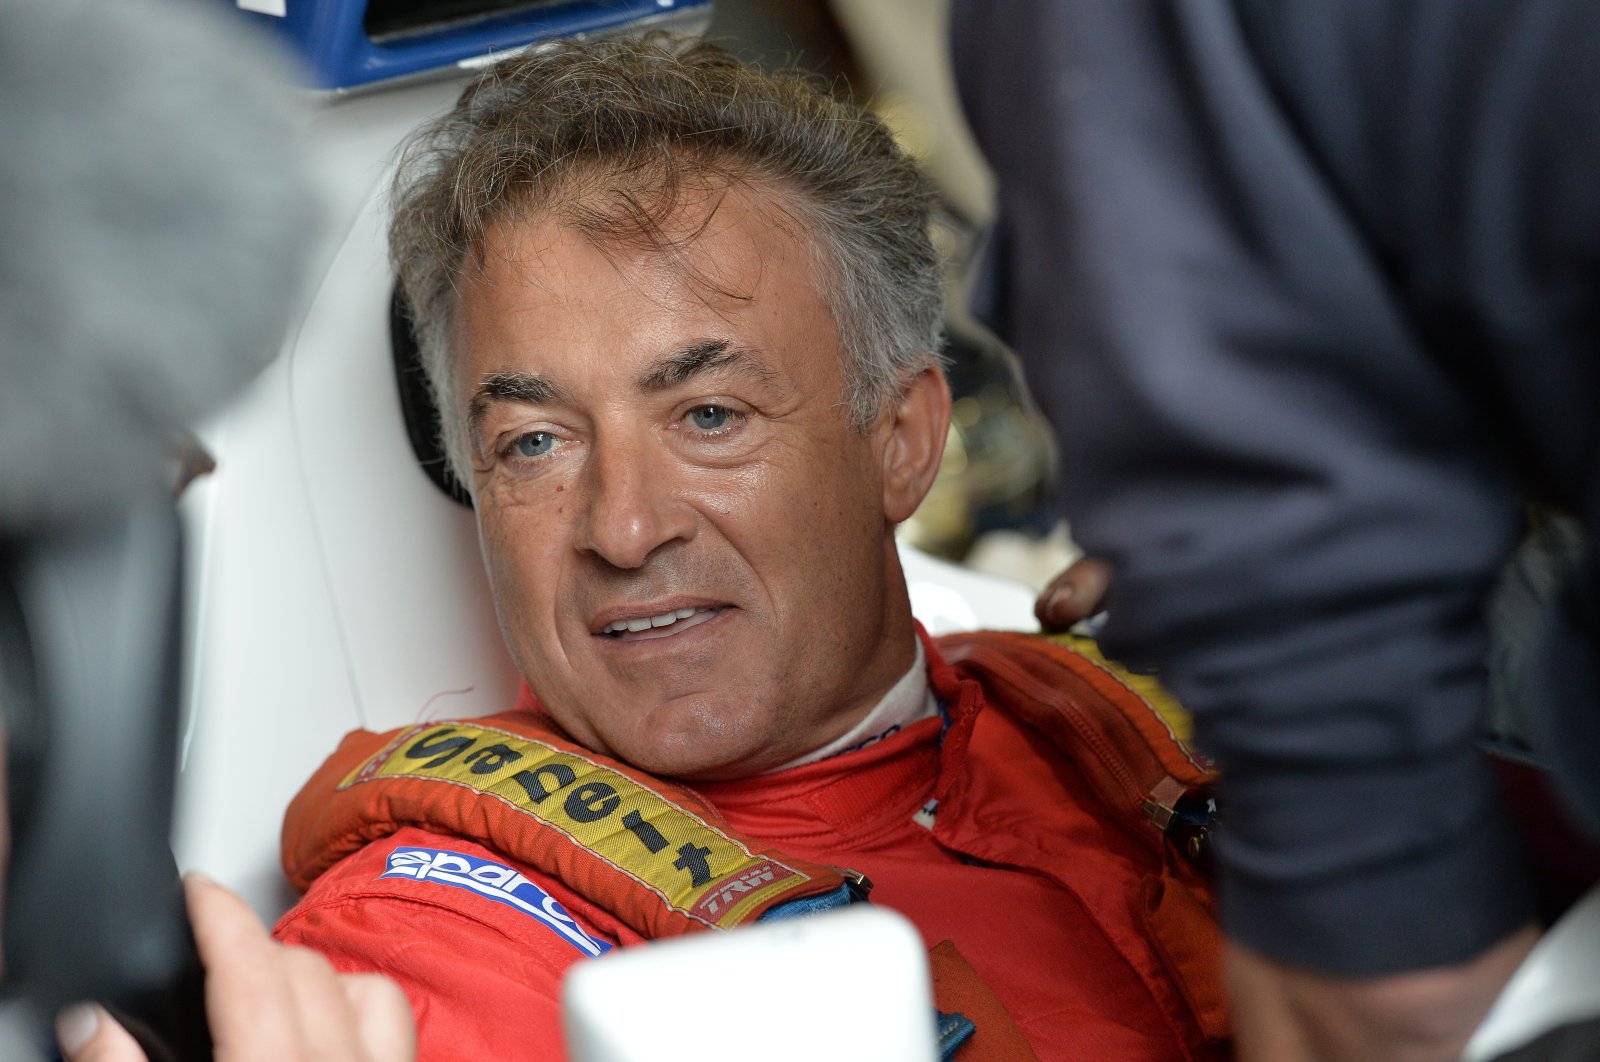  Former Formula 1 driver Jean Alesi during the French Historic Grand Prix, Var, France, July 1, 2017. (Reuters Photo)